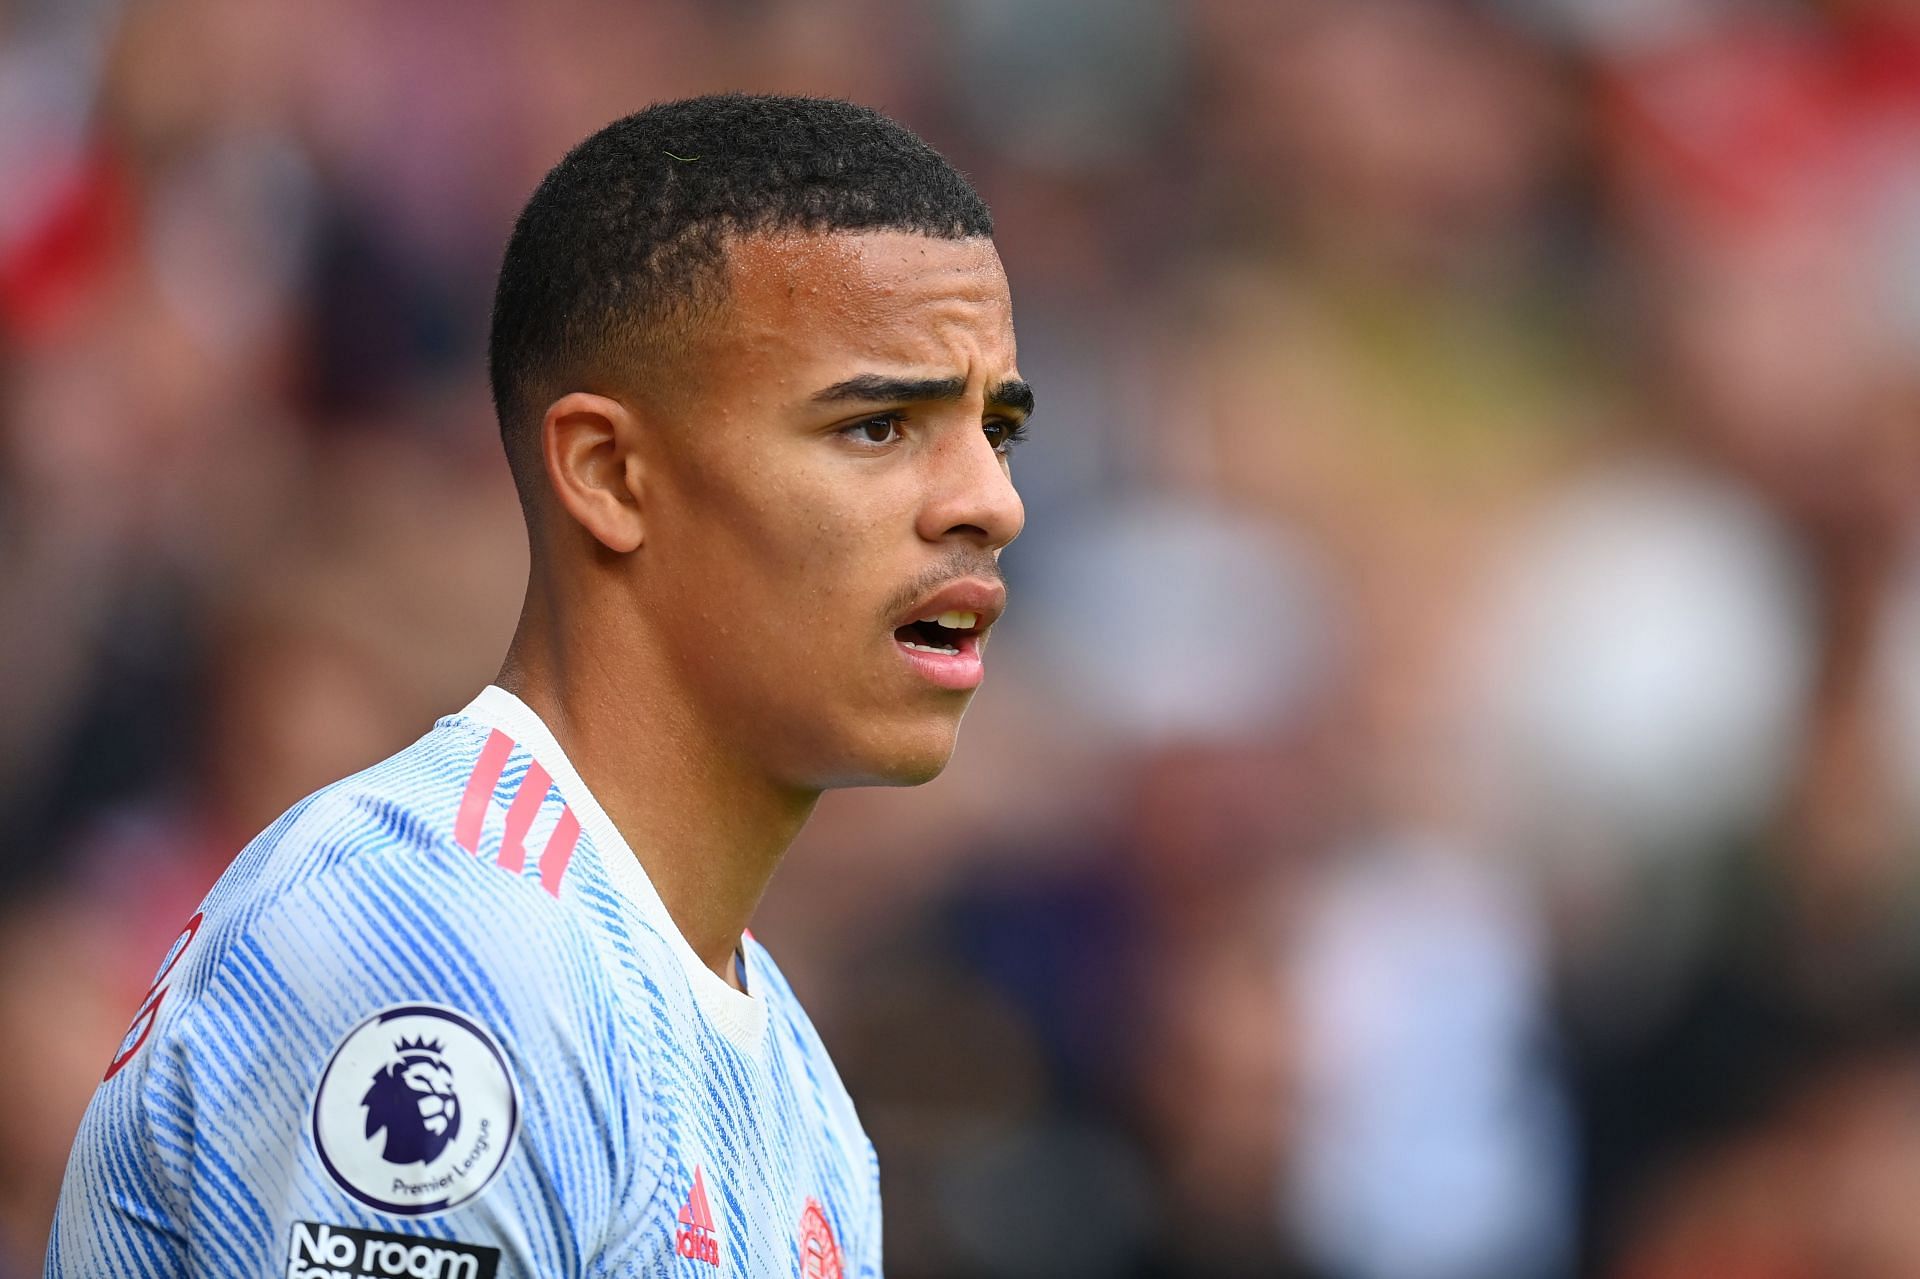 “England would have won the Euro’s with this kid” - Ex-Marseille star says Mason Greenwood ‘deserves’ second chance amid Manchester United exit